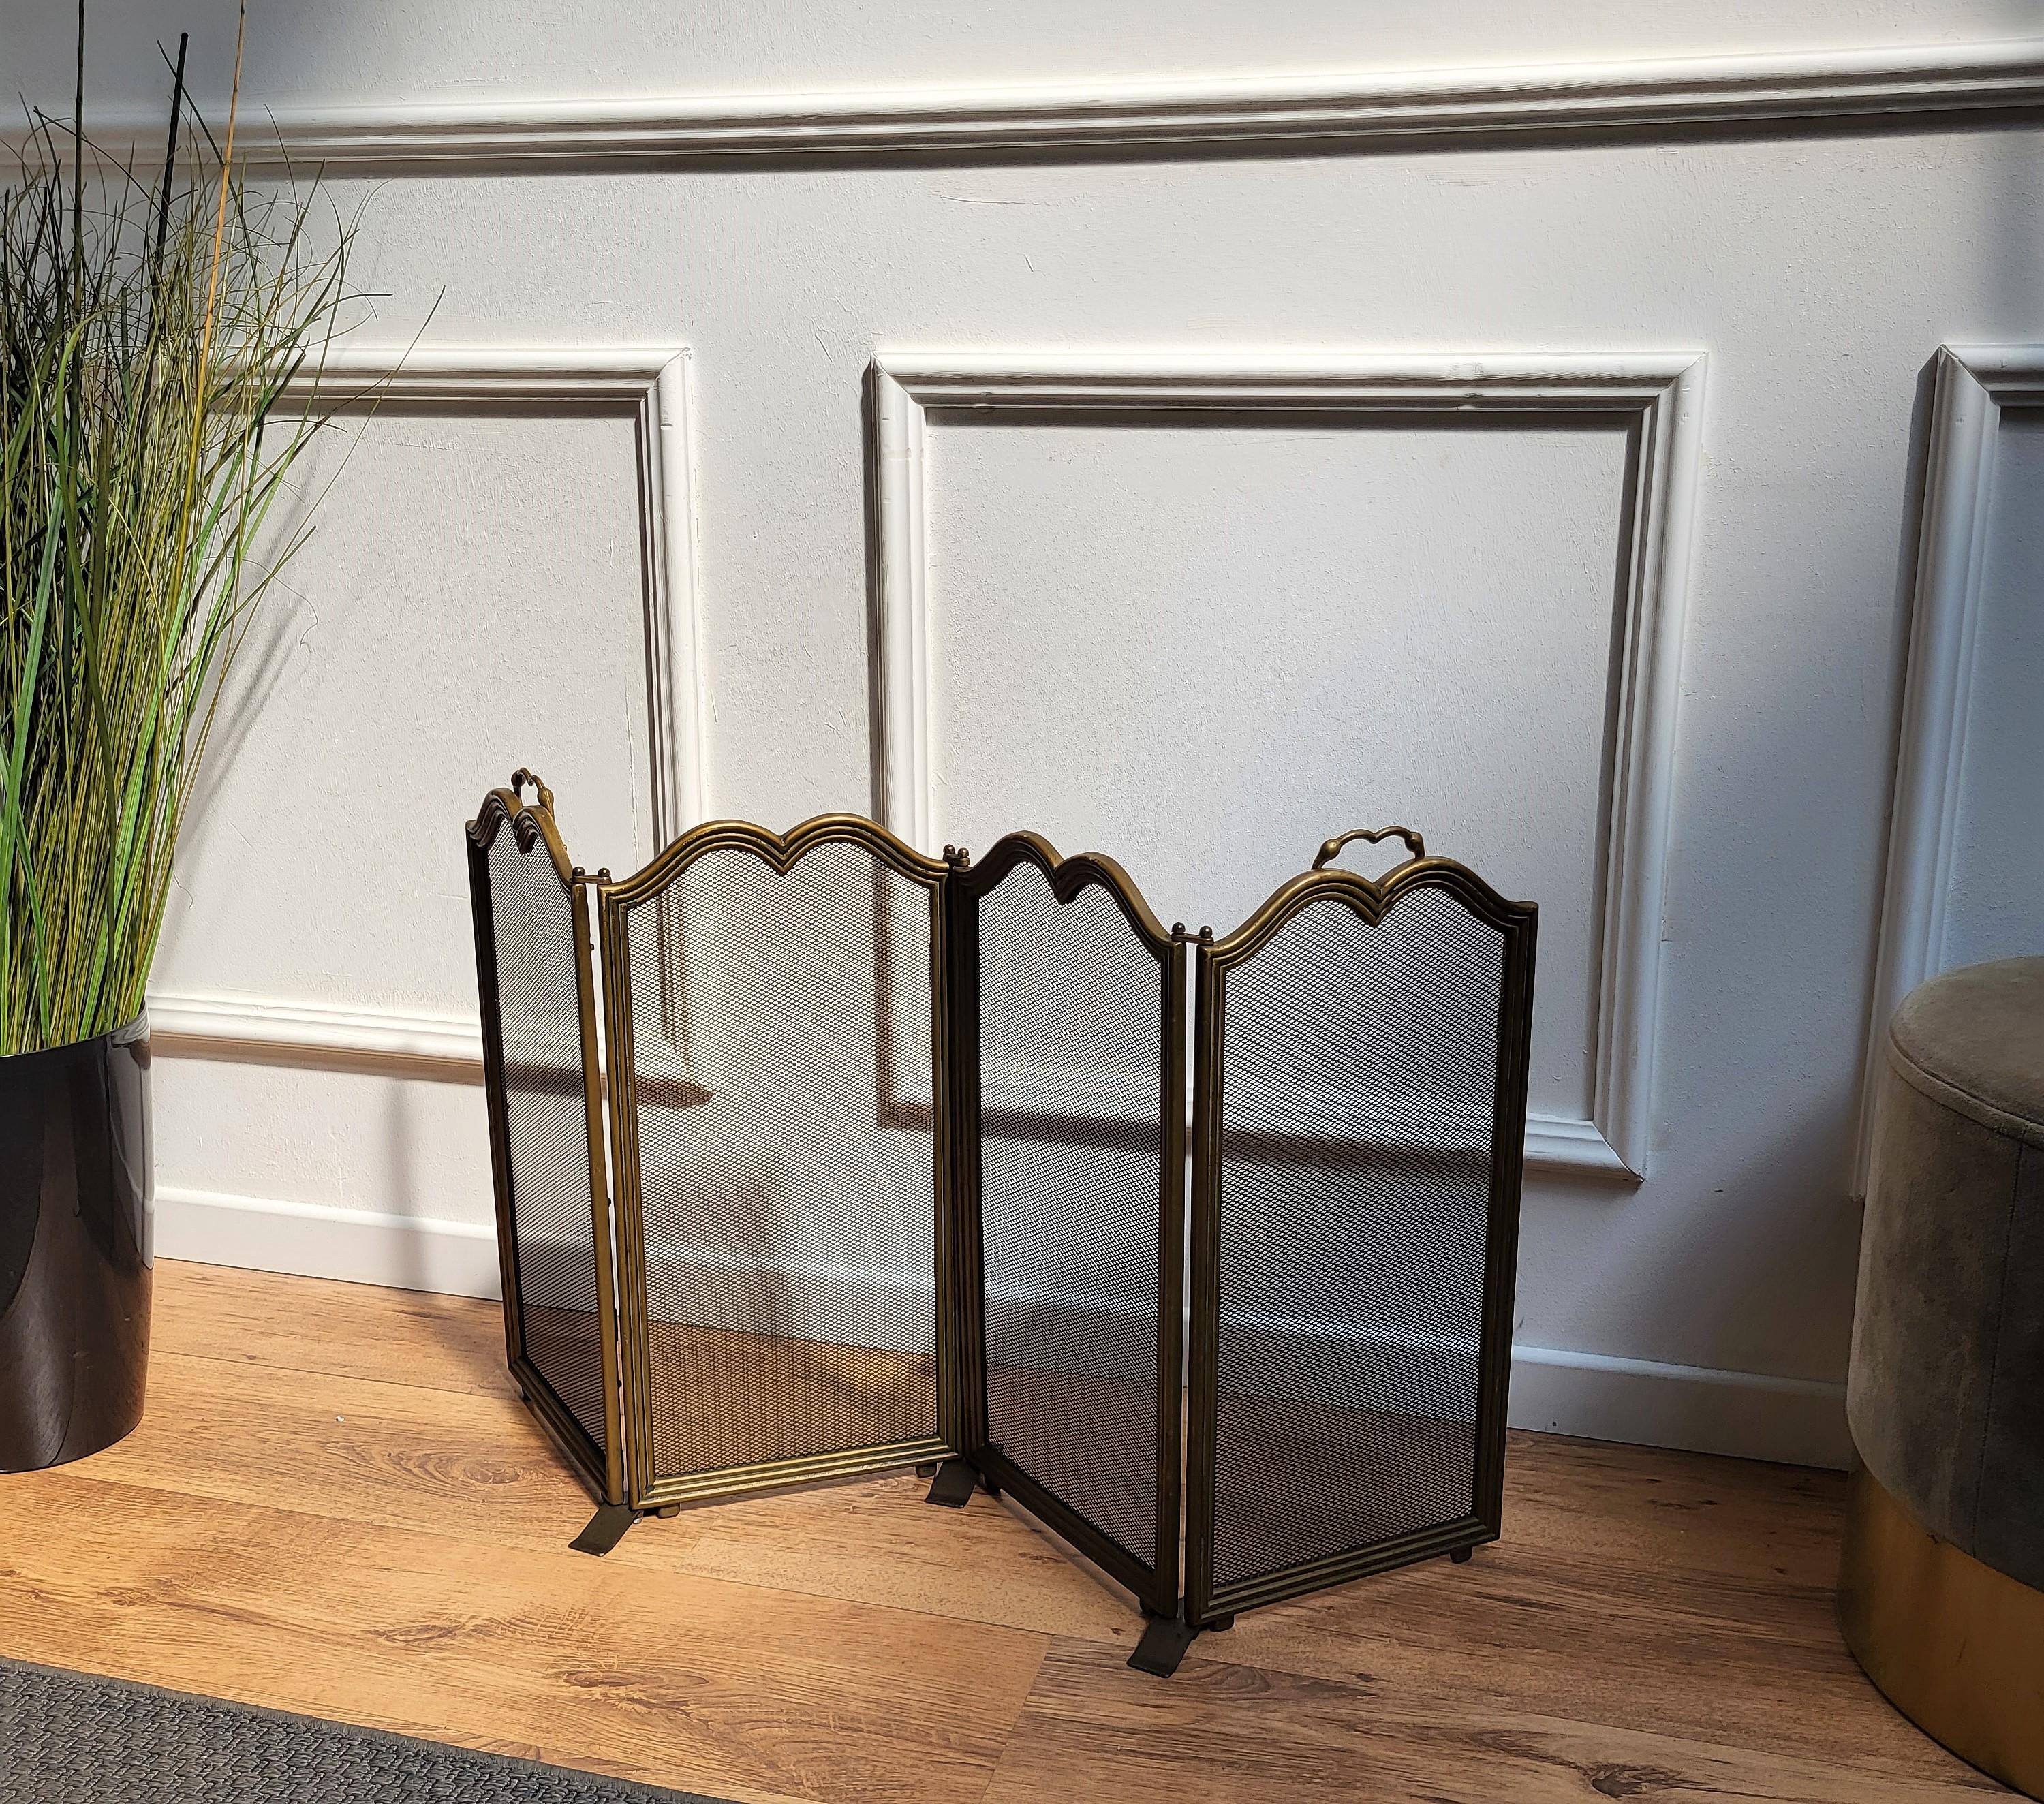 Italian gilt brass foldable fireplace screen or fire screen. Nice decorative piece, this-4 piece screen is easy to tow and use, the pieces can be easily folded to adapt and work with any opening. Overall very decorative piece in nice condition.
 